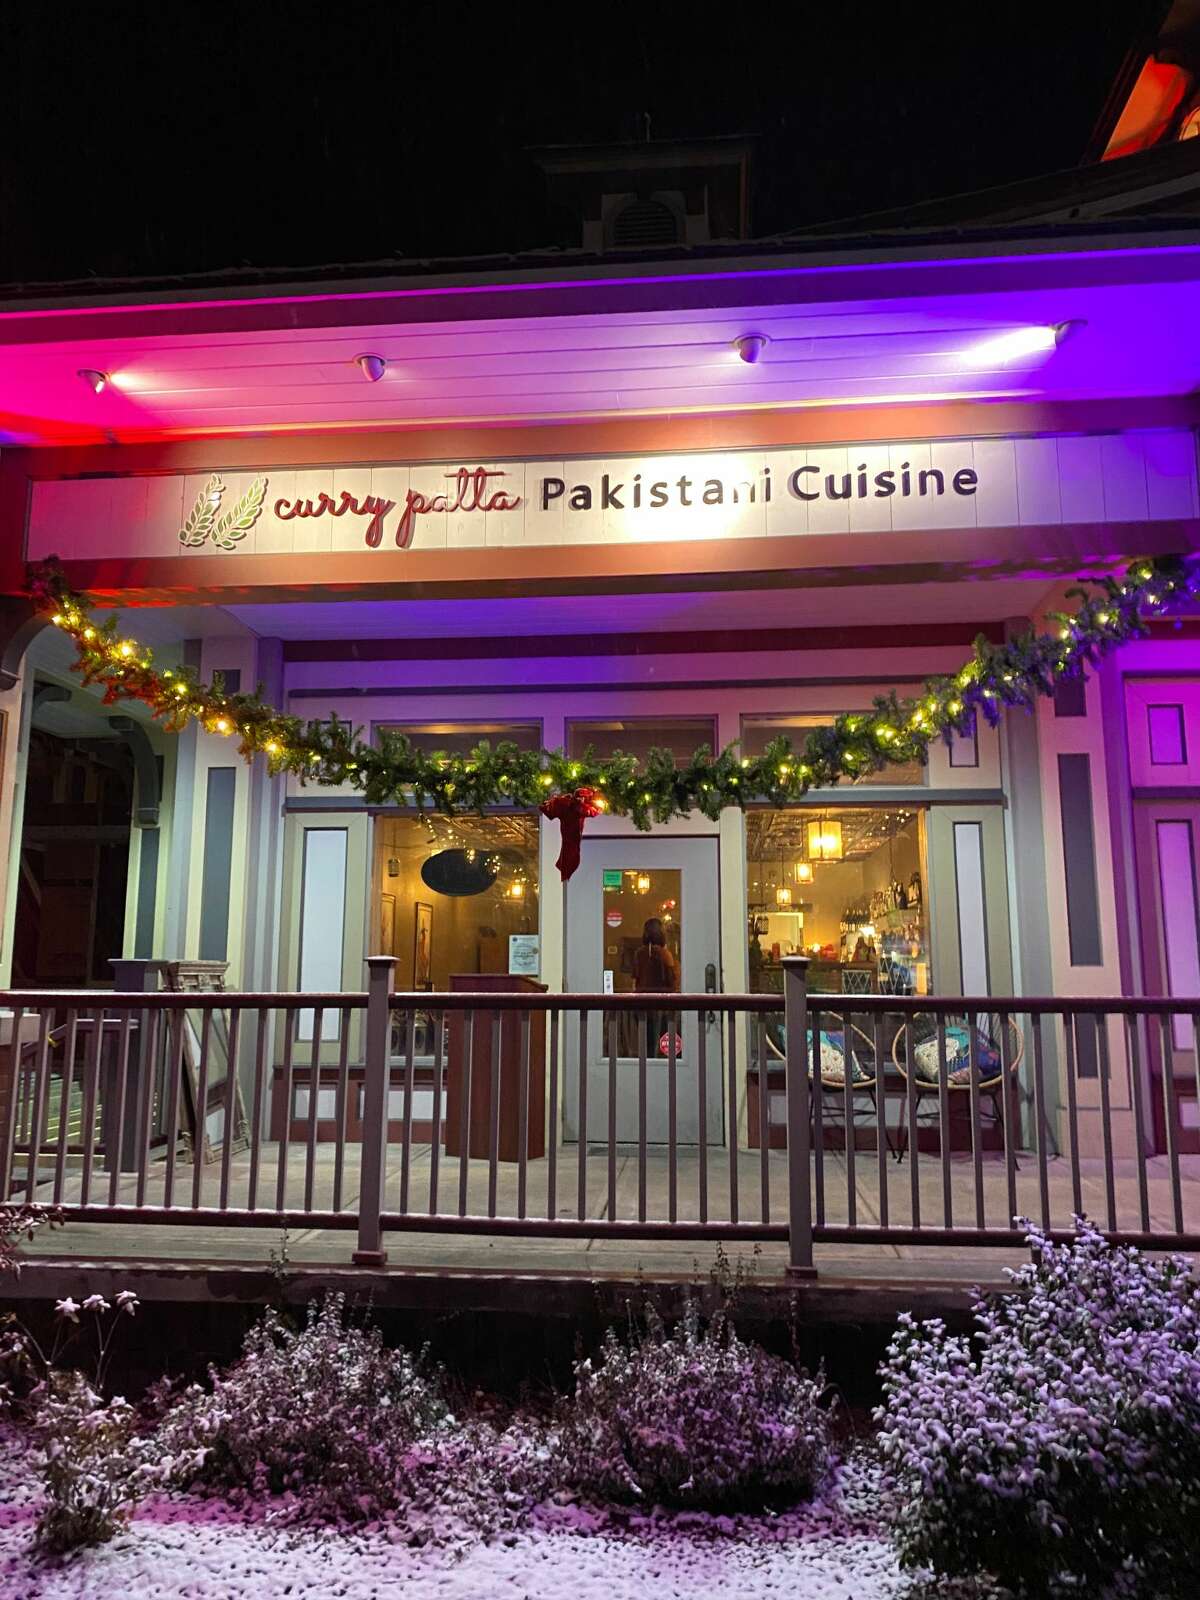 Curry Patta in Altamont, open for about a year and planning for an expansion in early 2022, is owned by a woman who spent two decades managing dental practices.